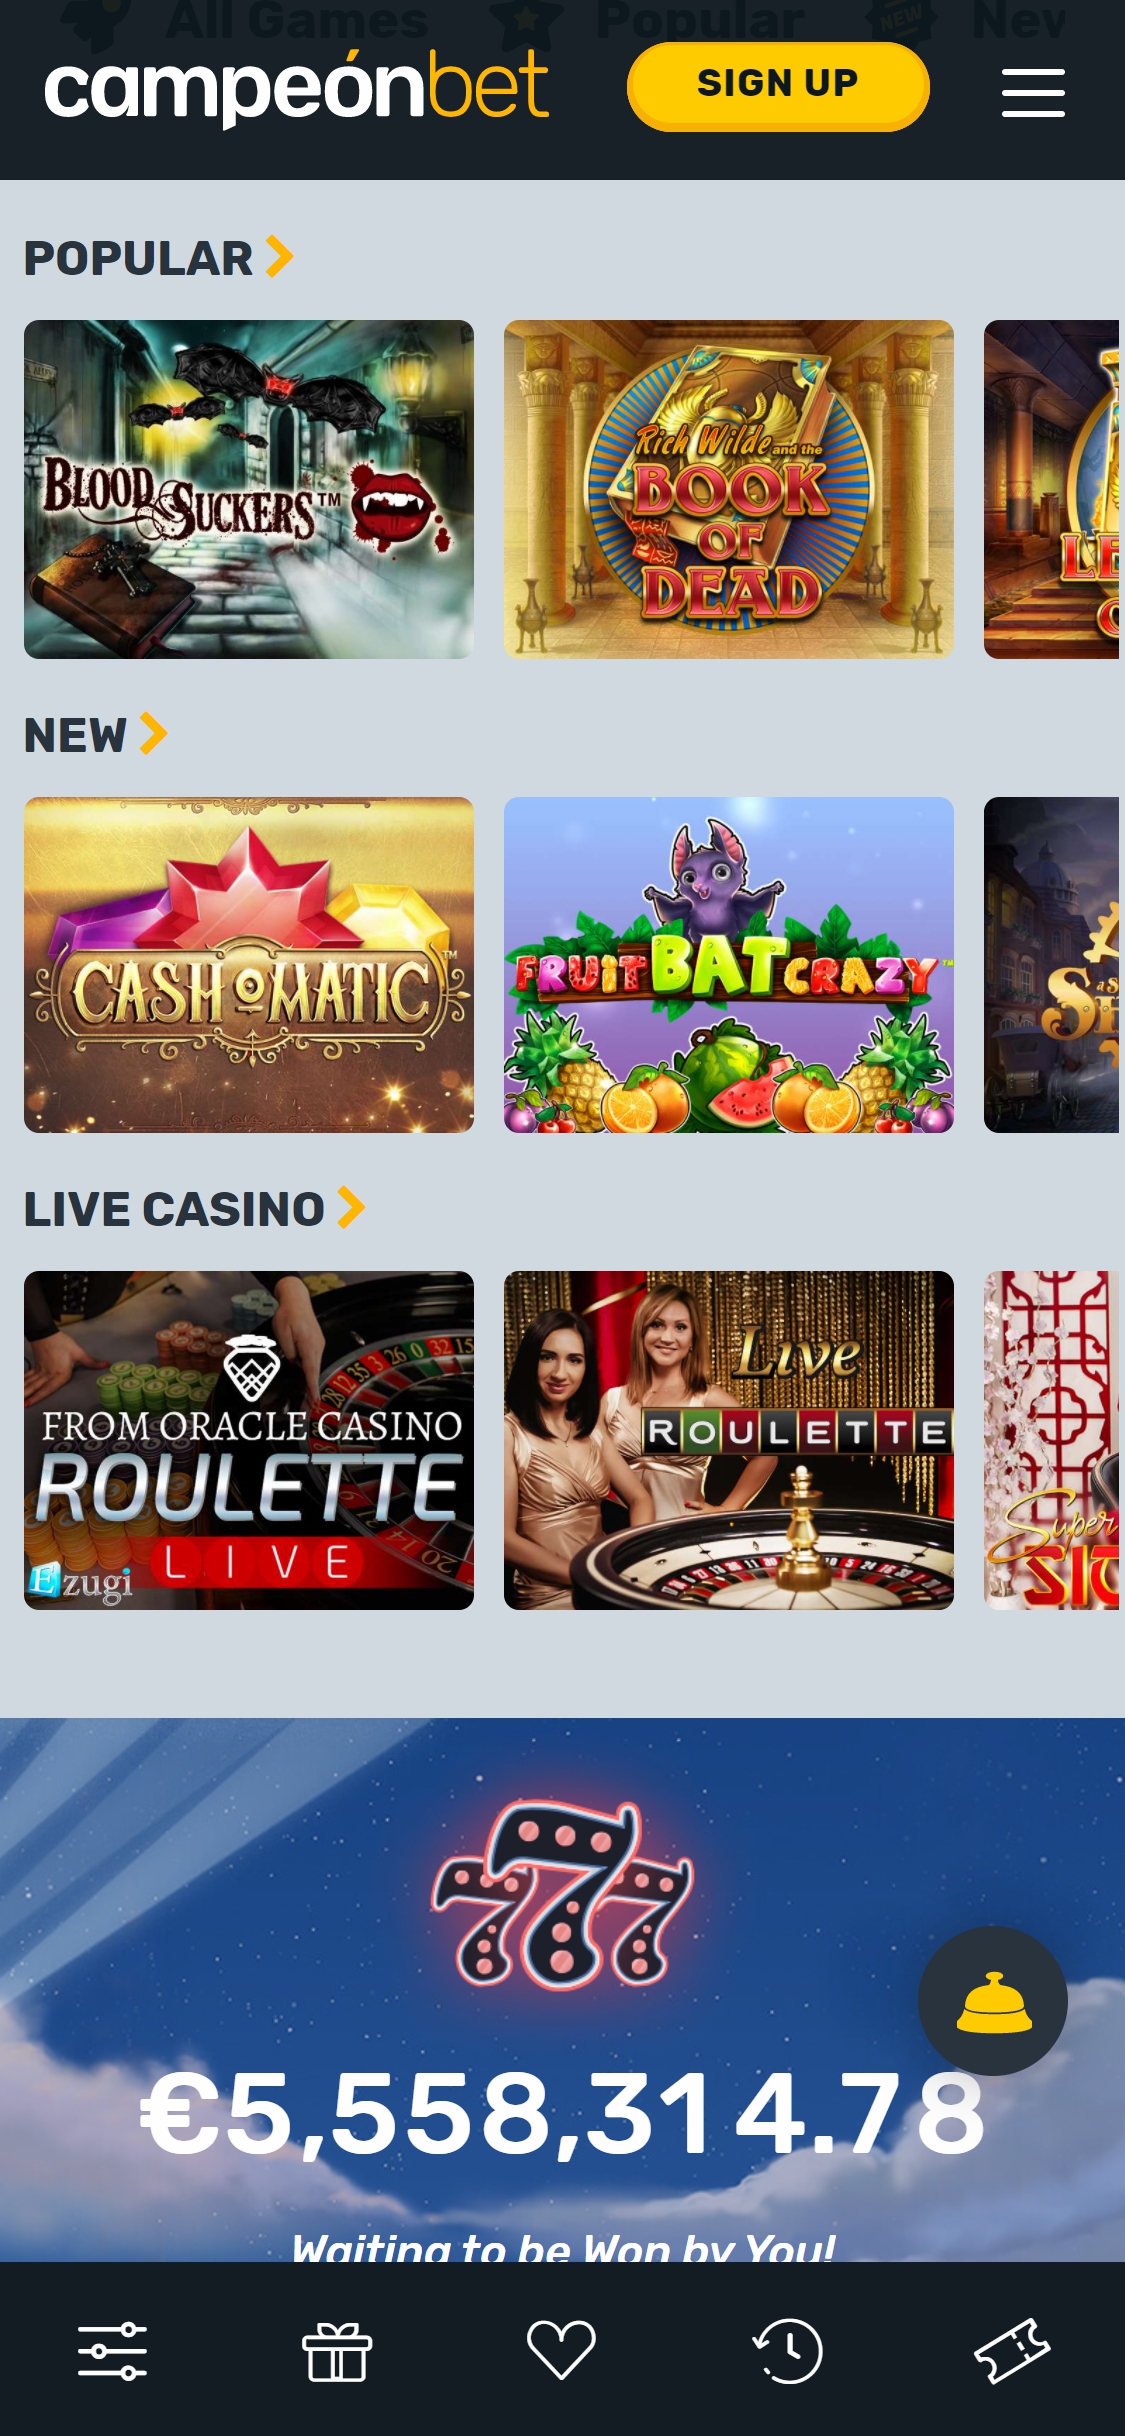 Campeon Bet Casino Mobile Games Review